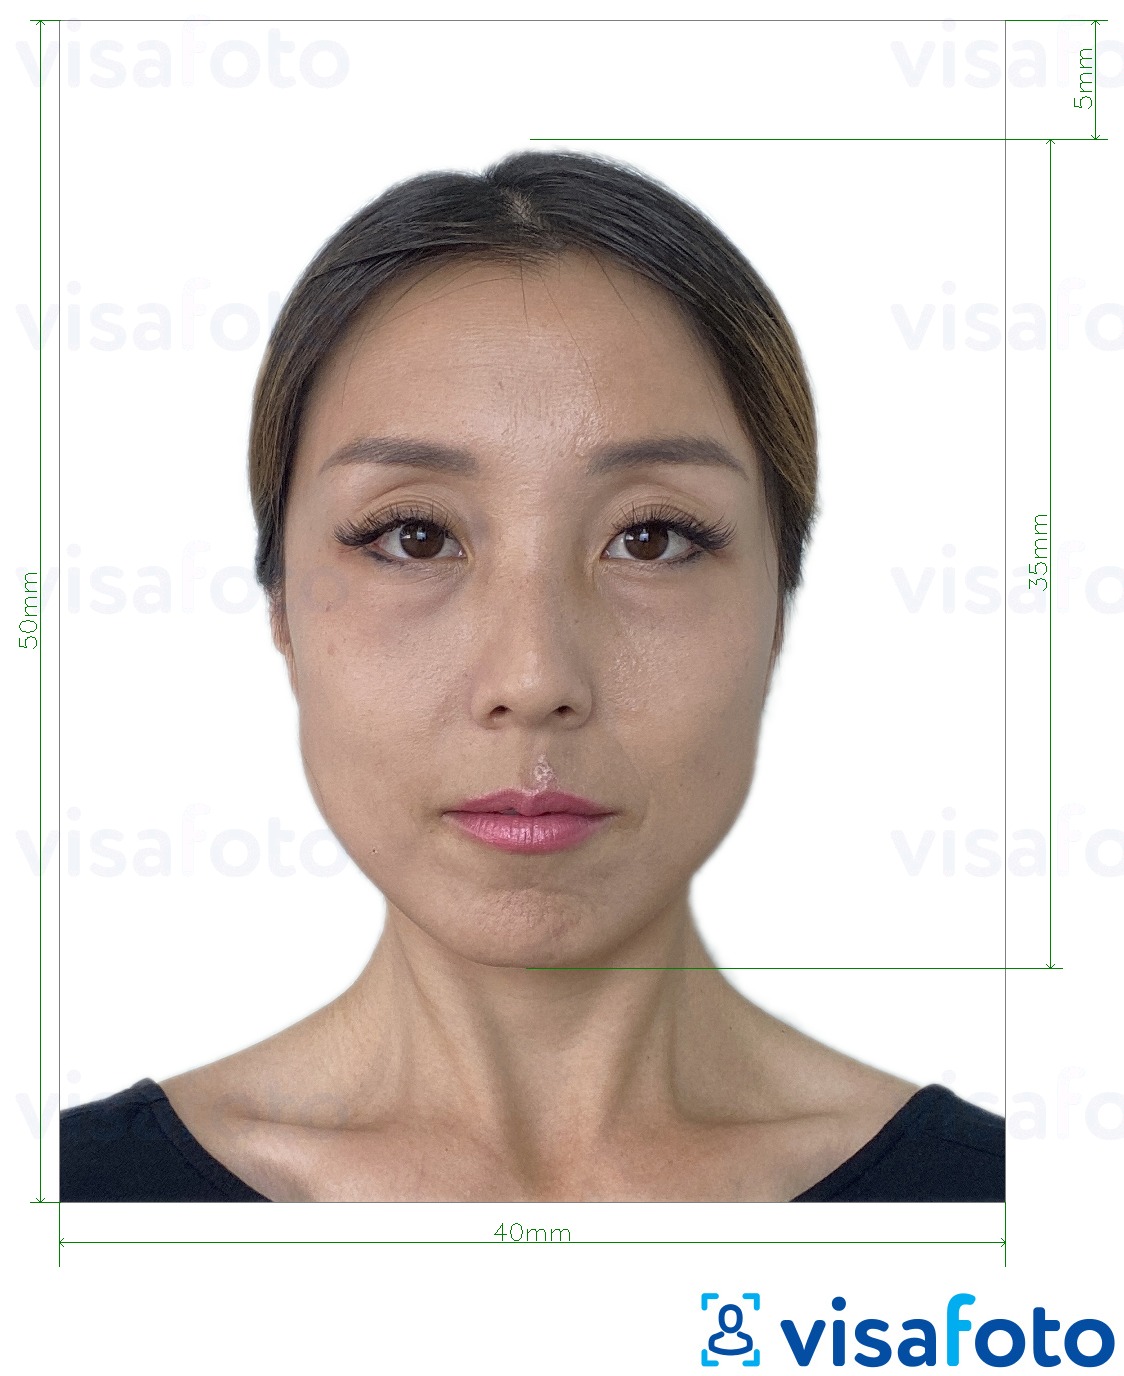 Example of photo for Hong Kong Passport 40x50 mm (4x5 cm) with exact size specification